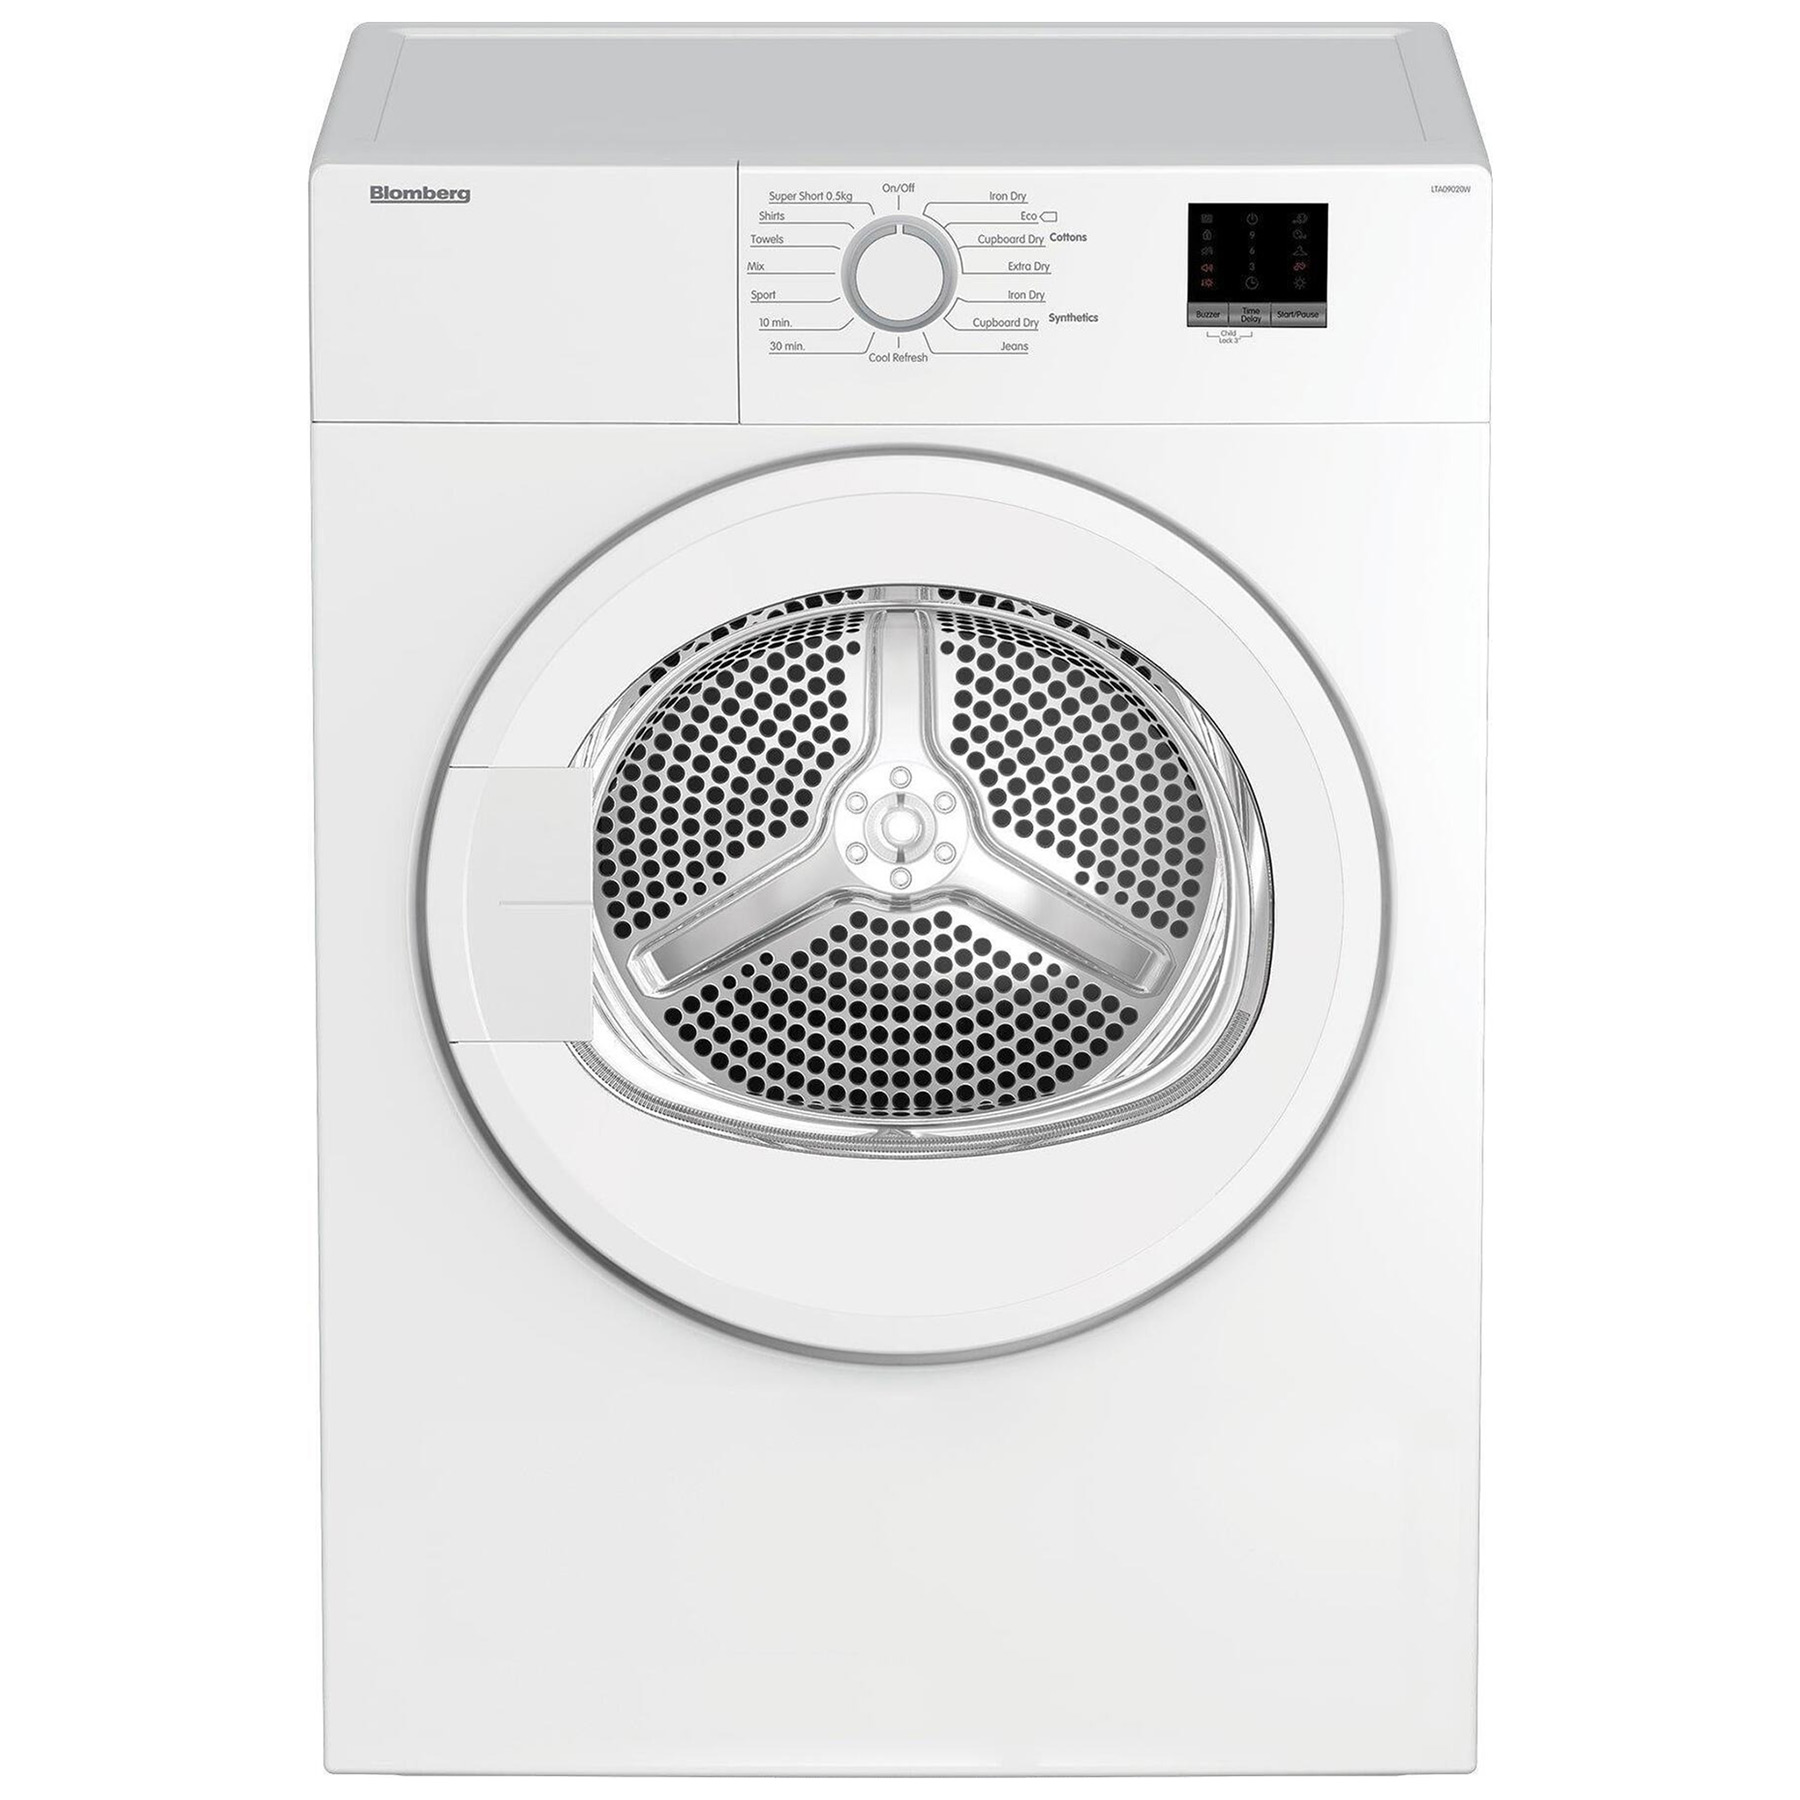 Image of Blomberg LTA09020W 9Kg Vented Dryer in White C Rated Sensor Delay